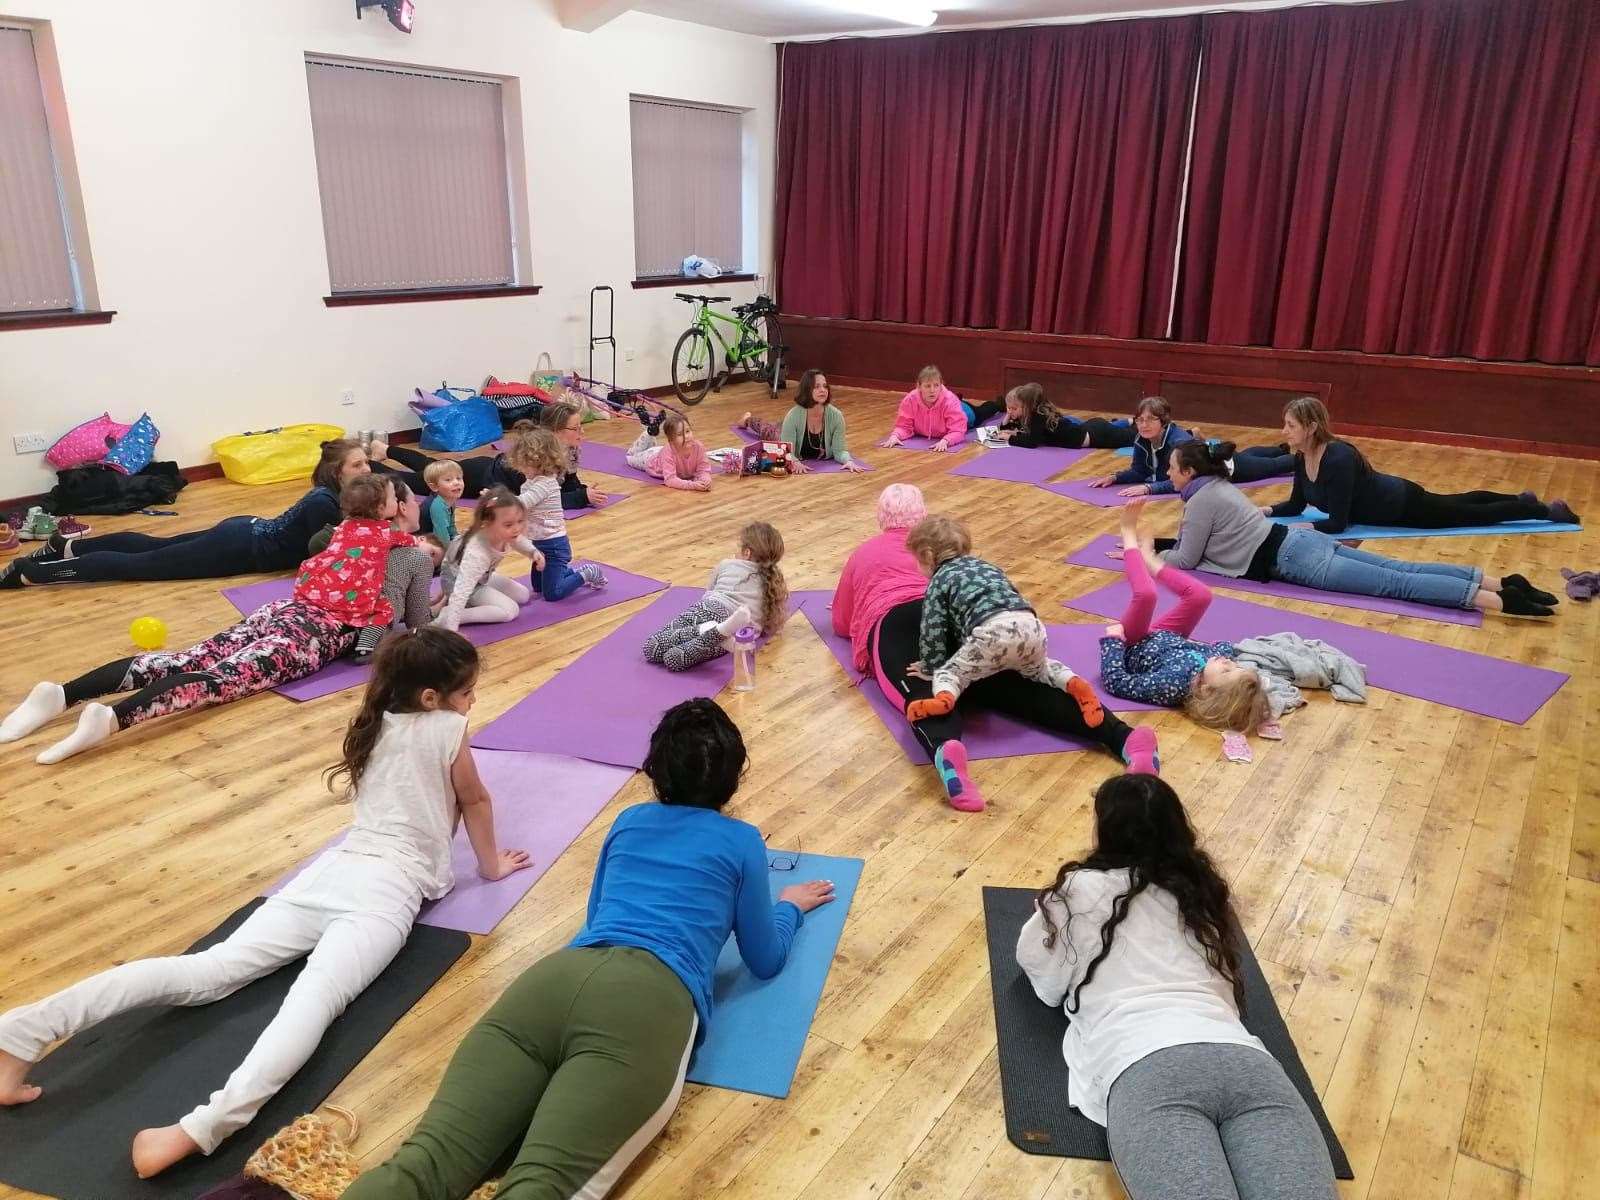 All ages attended the family yoga session led by Lana Frost.